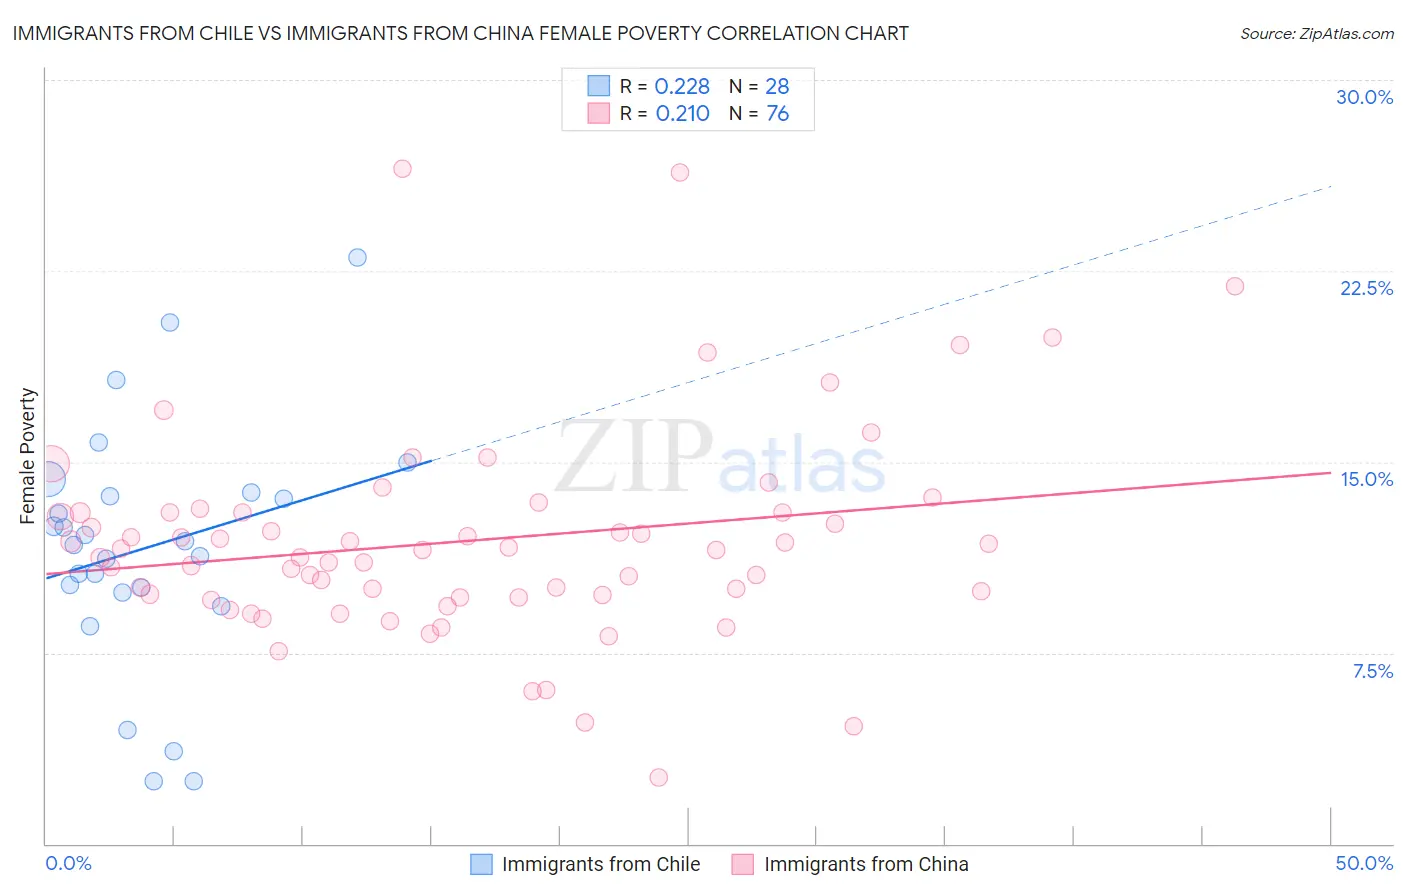 Immigrants from Chile vs Immigrants from China Female Poverty